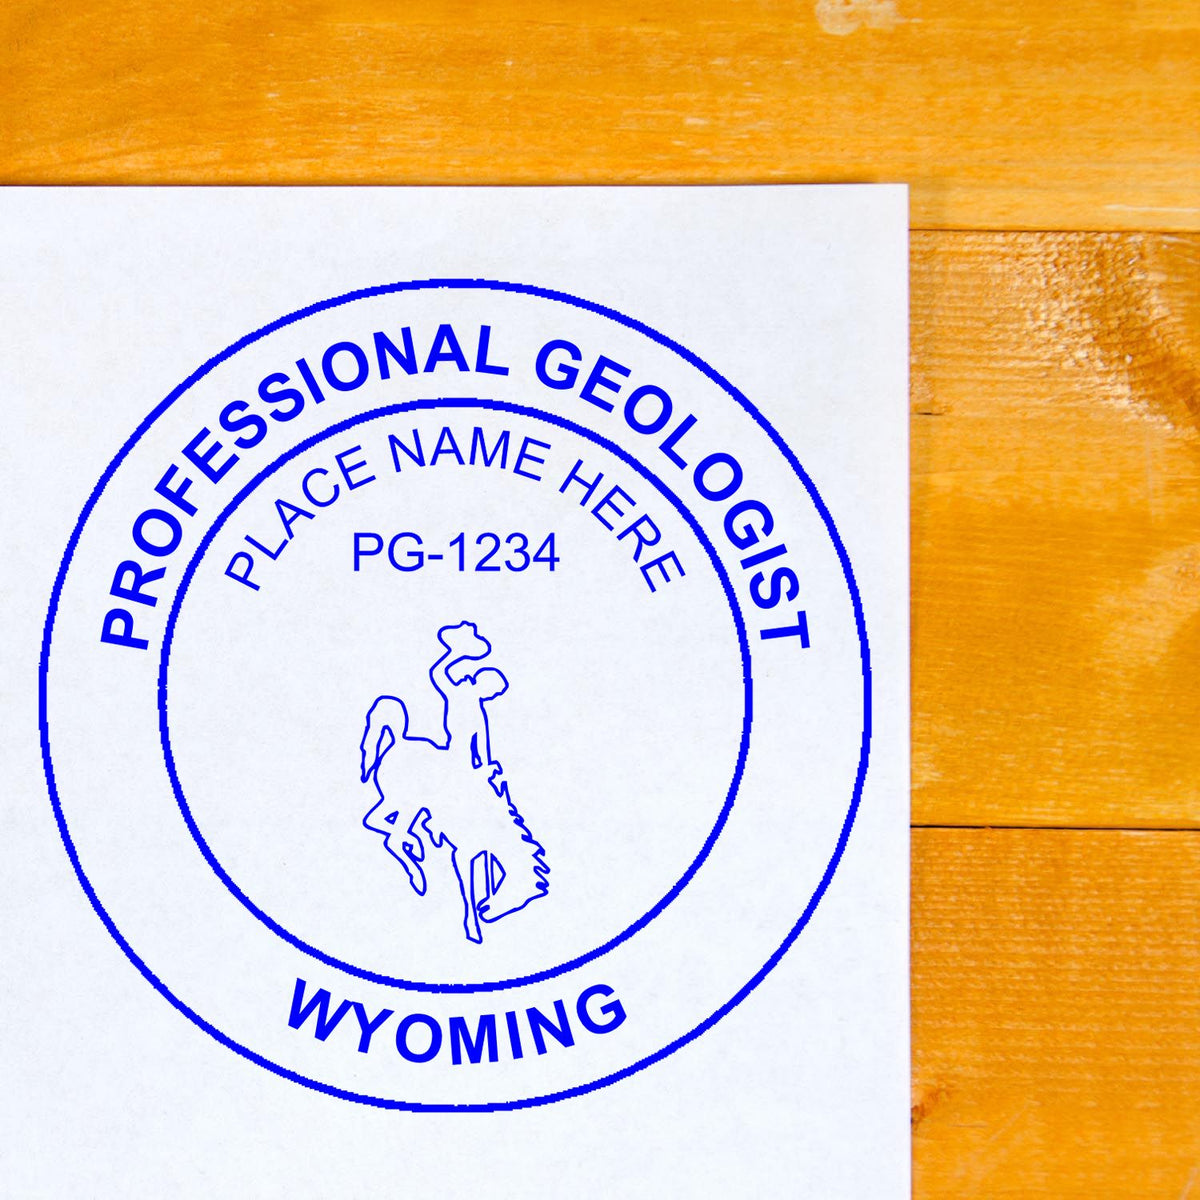 This paper is stamped with a sample imprint of the Self-Inking Wyoming Geologist Stamp, signifying its quality and reliability.